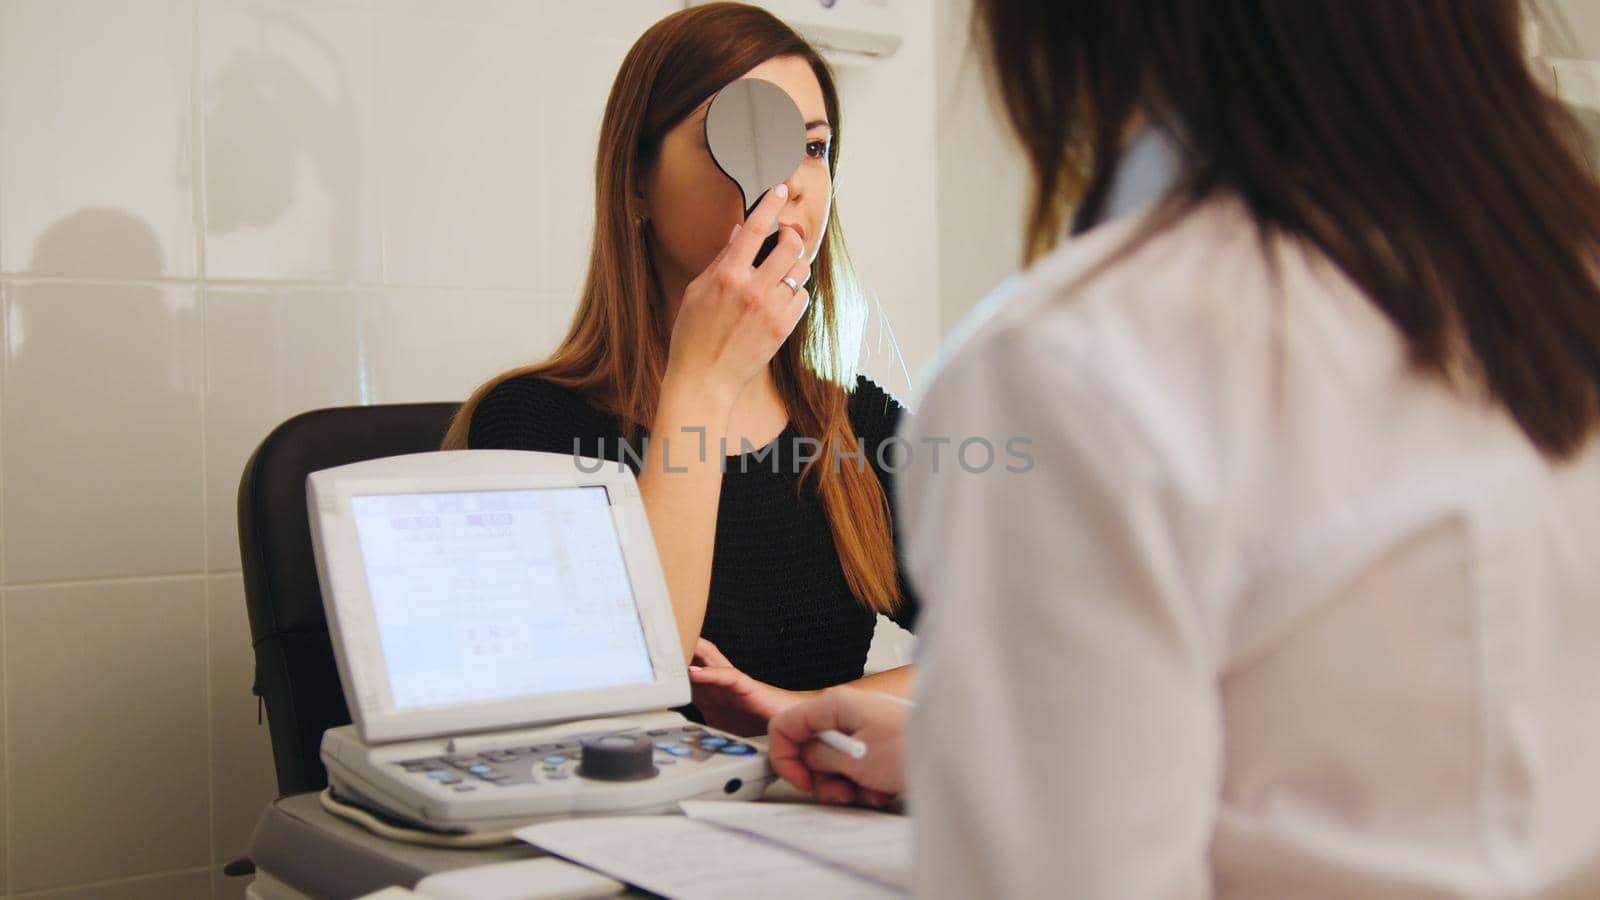 Ophthalmology - white woman checks vision in an ophthalmologist room - short-sighted and squints, telephoto